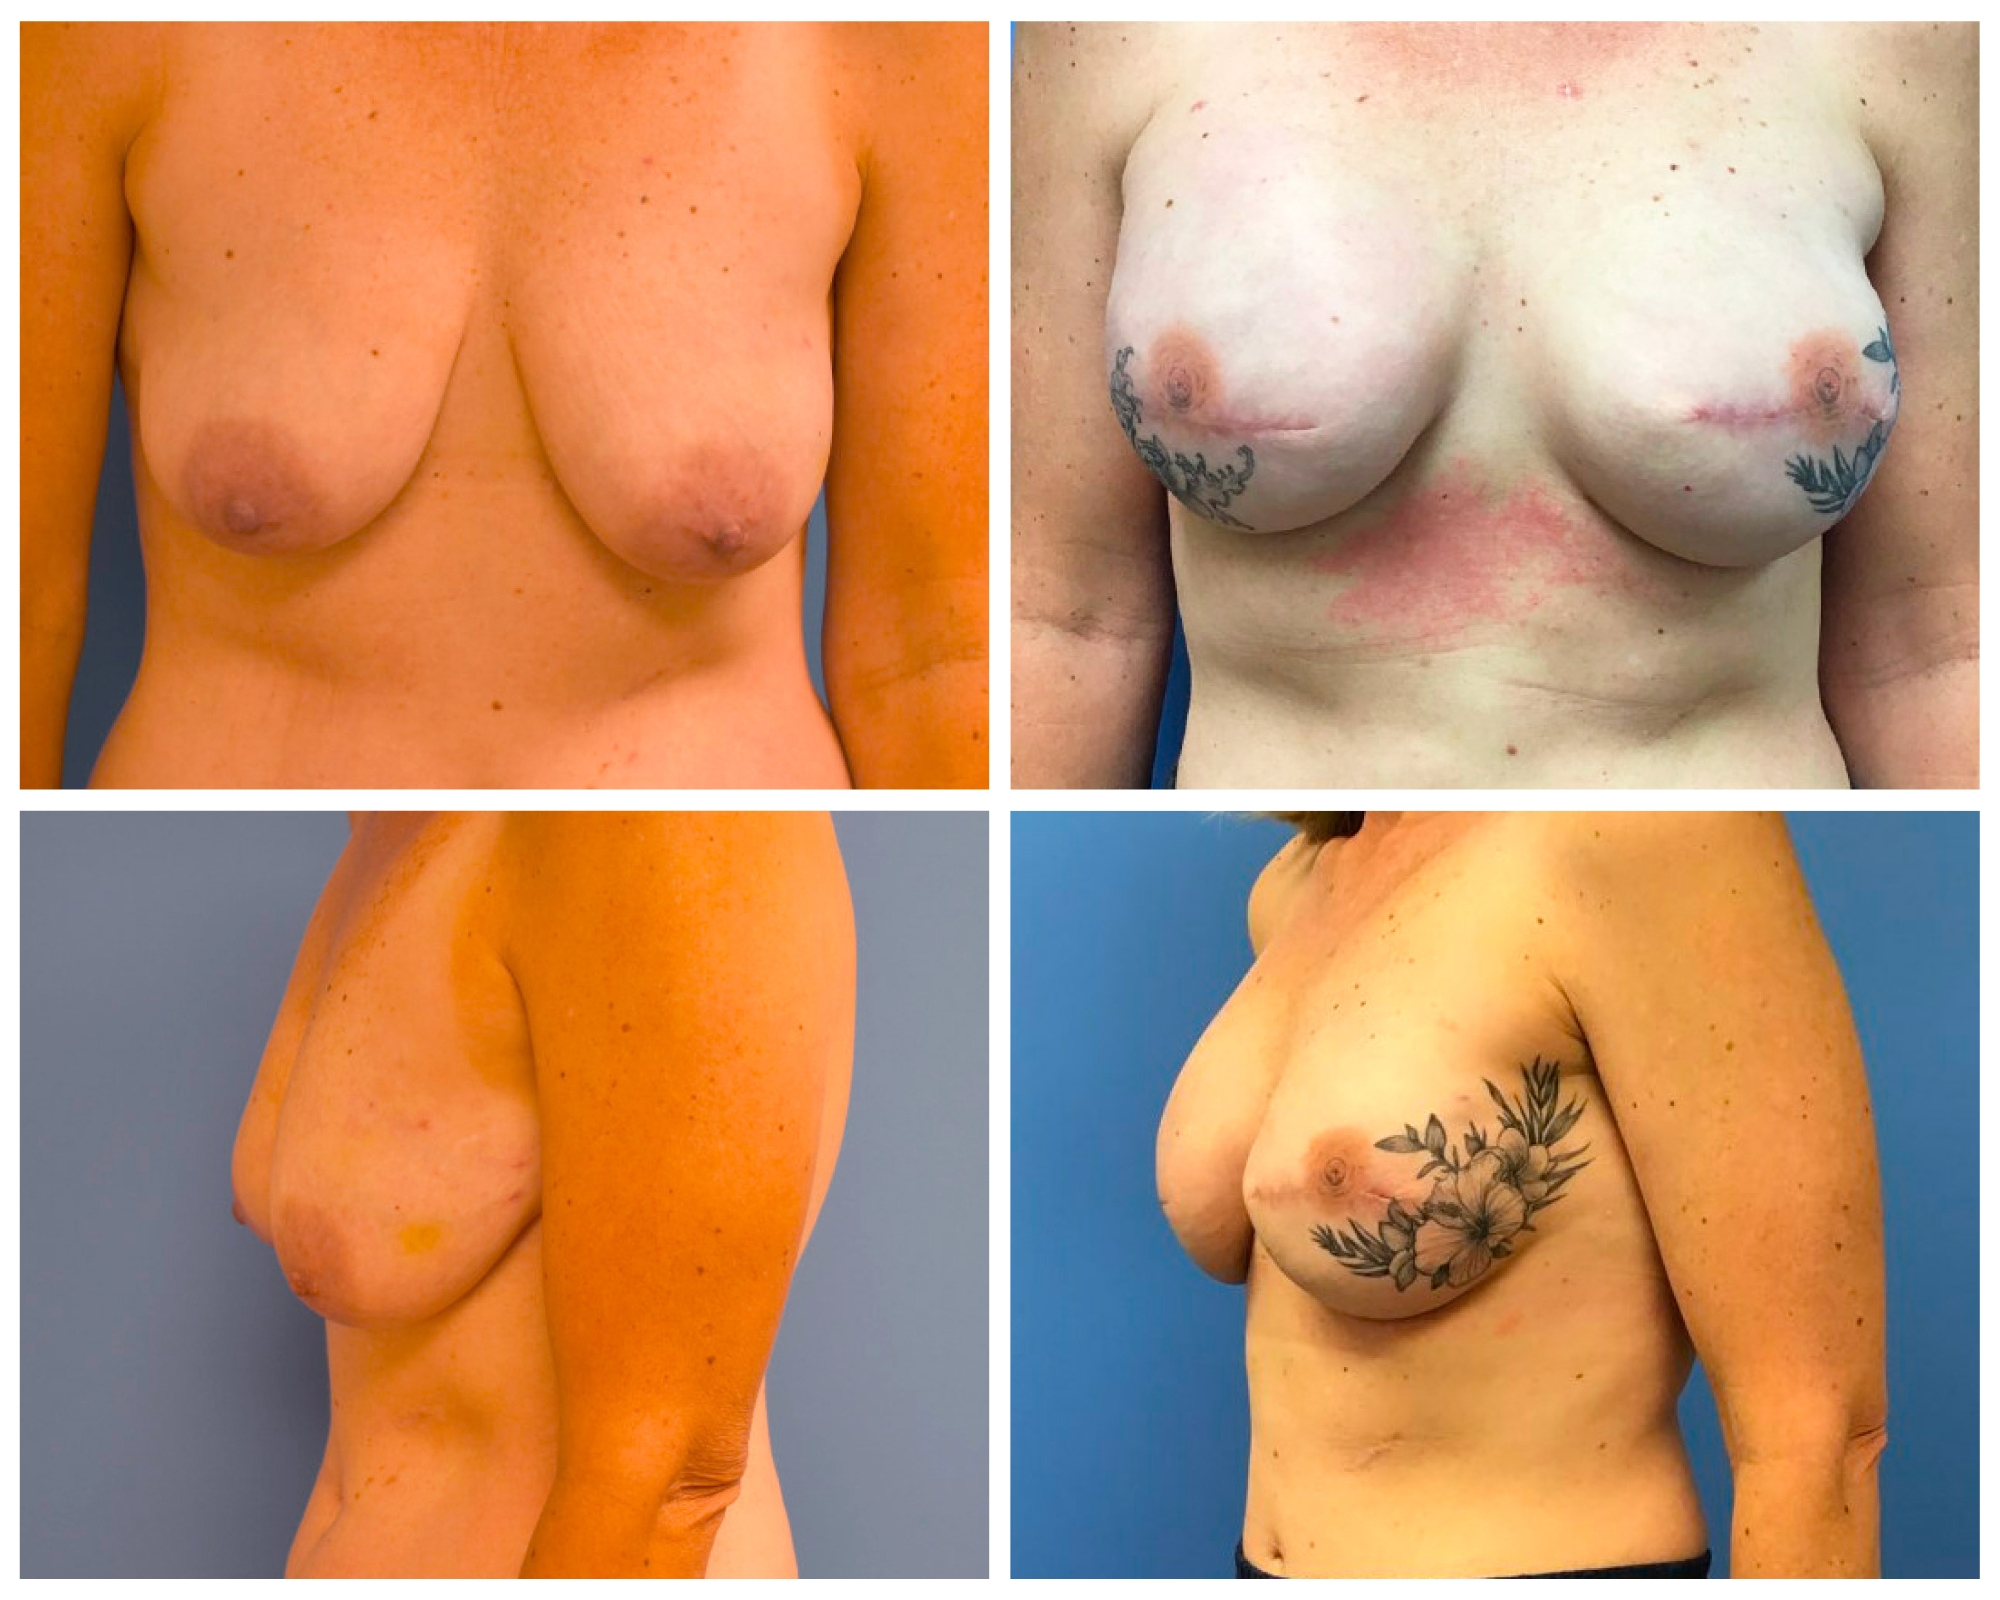 Implant-based breast reconstruction with nipple tattoo after mastectomy